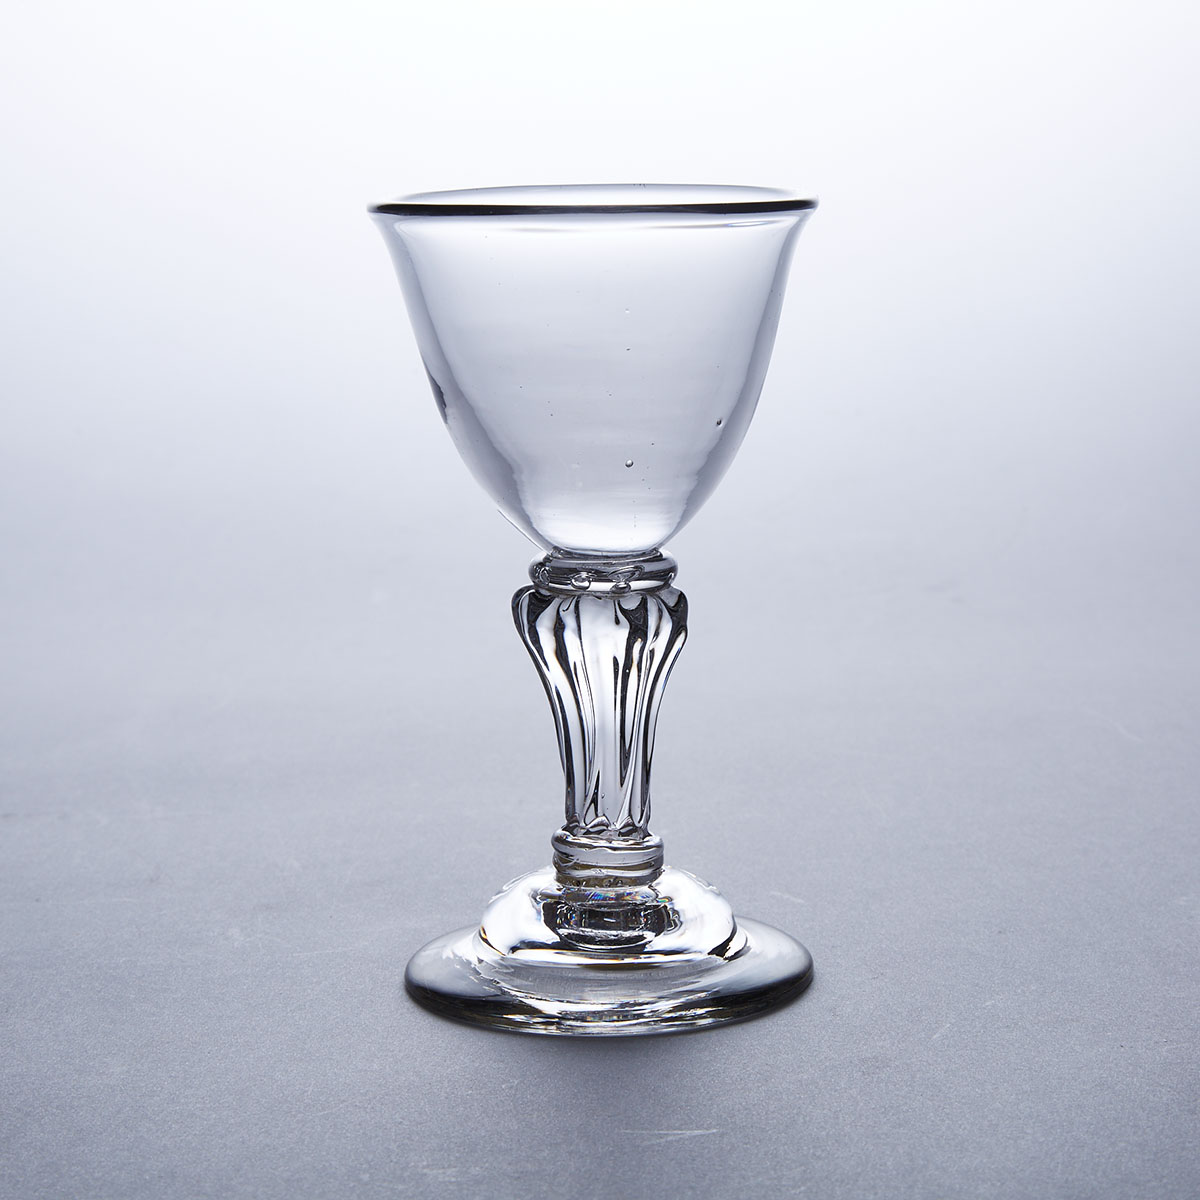 English Teared Knopped Moulded Pedestal Stemmed Glass Goblet, mid-18th century